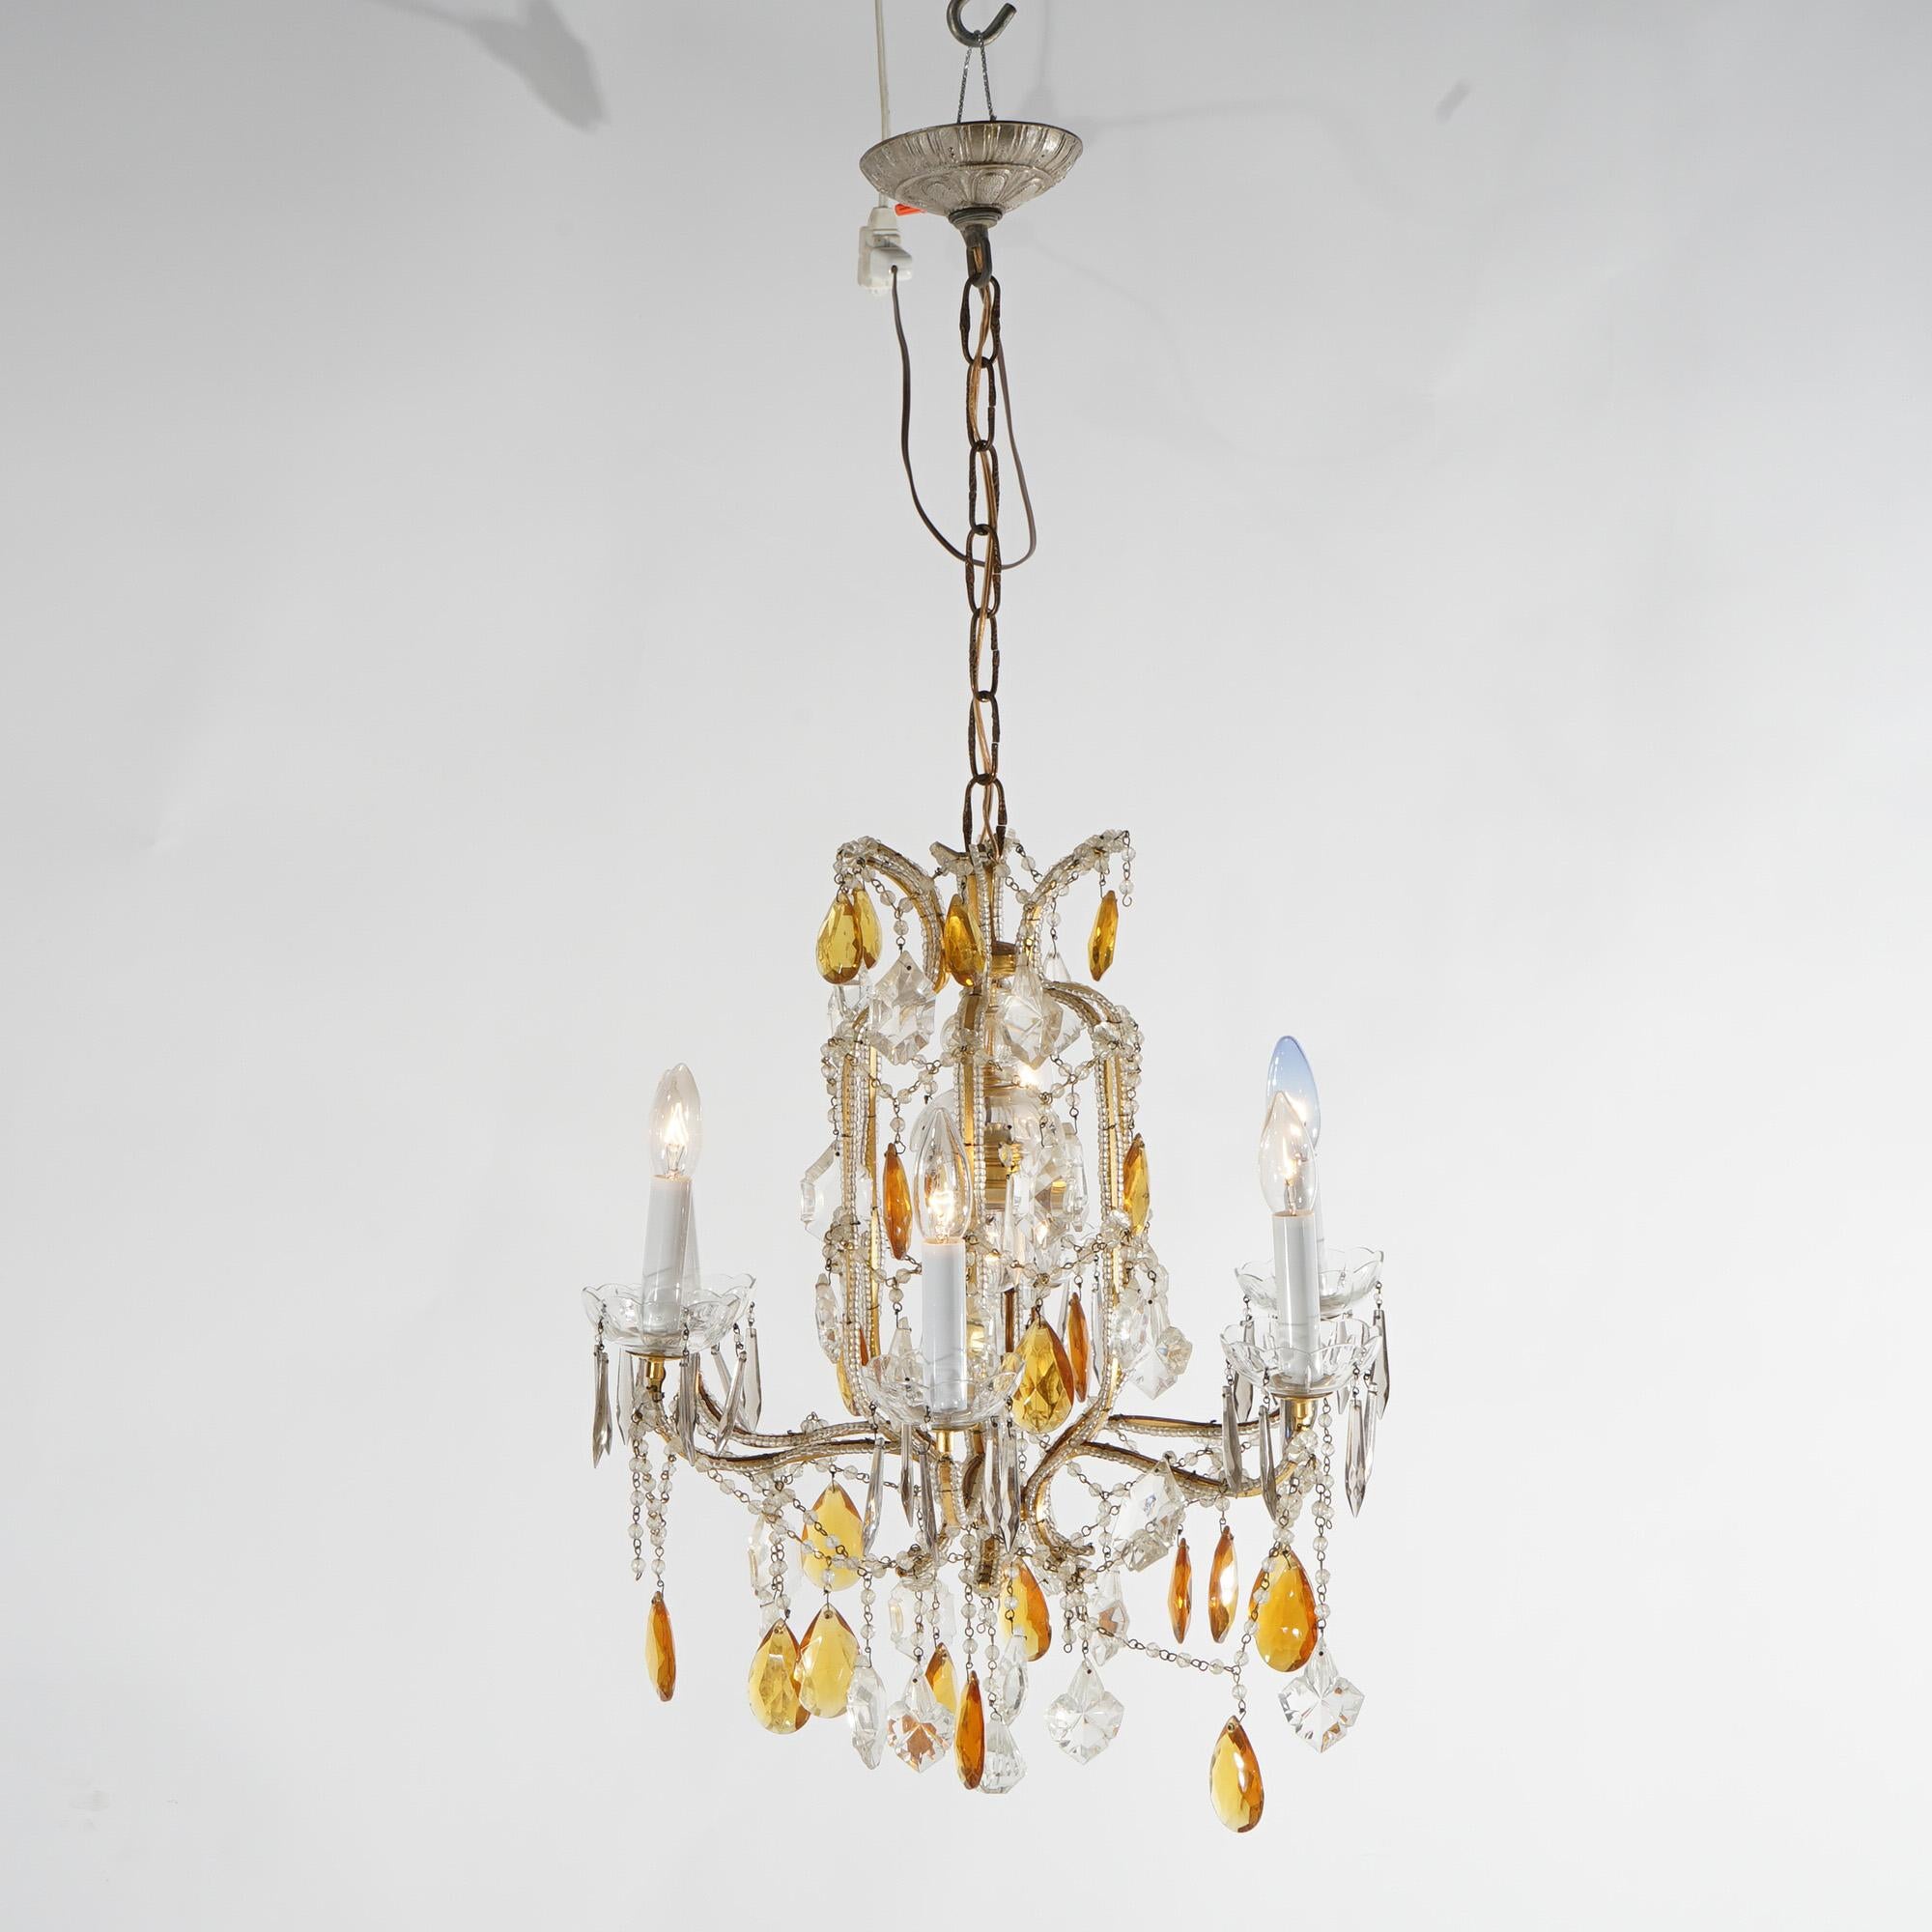 20th Century French Louis. XIV Style Seven-Light Crystal Chandelier with Amber Prisms, 20th C For Sale